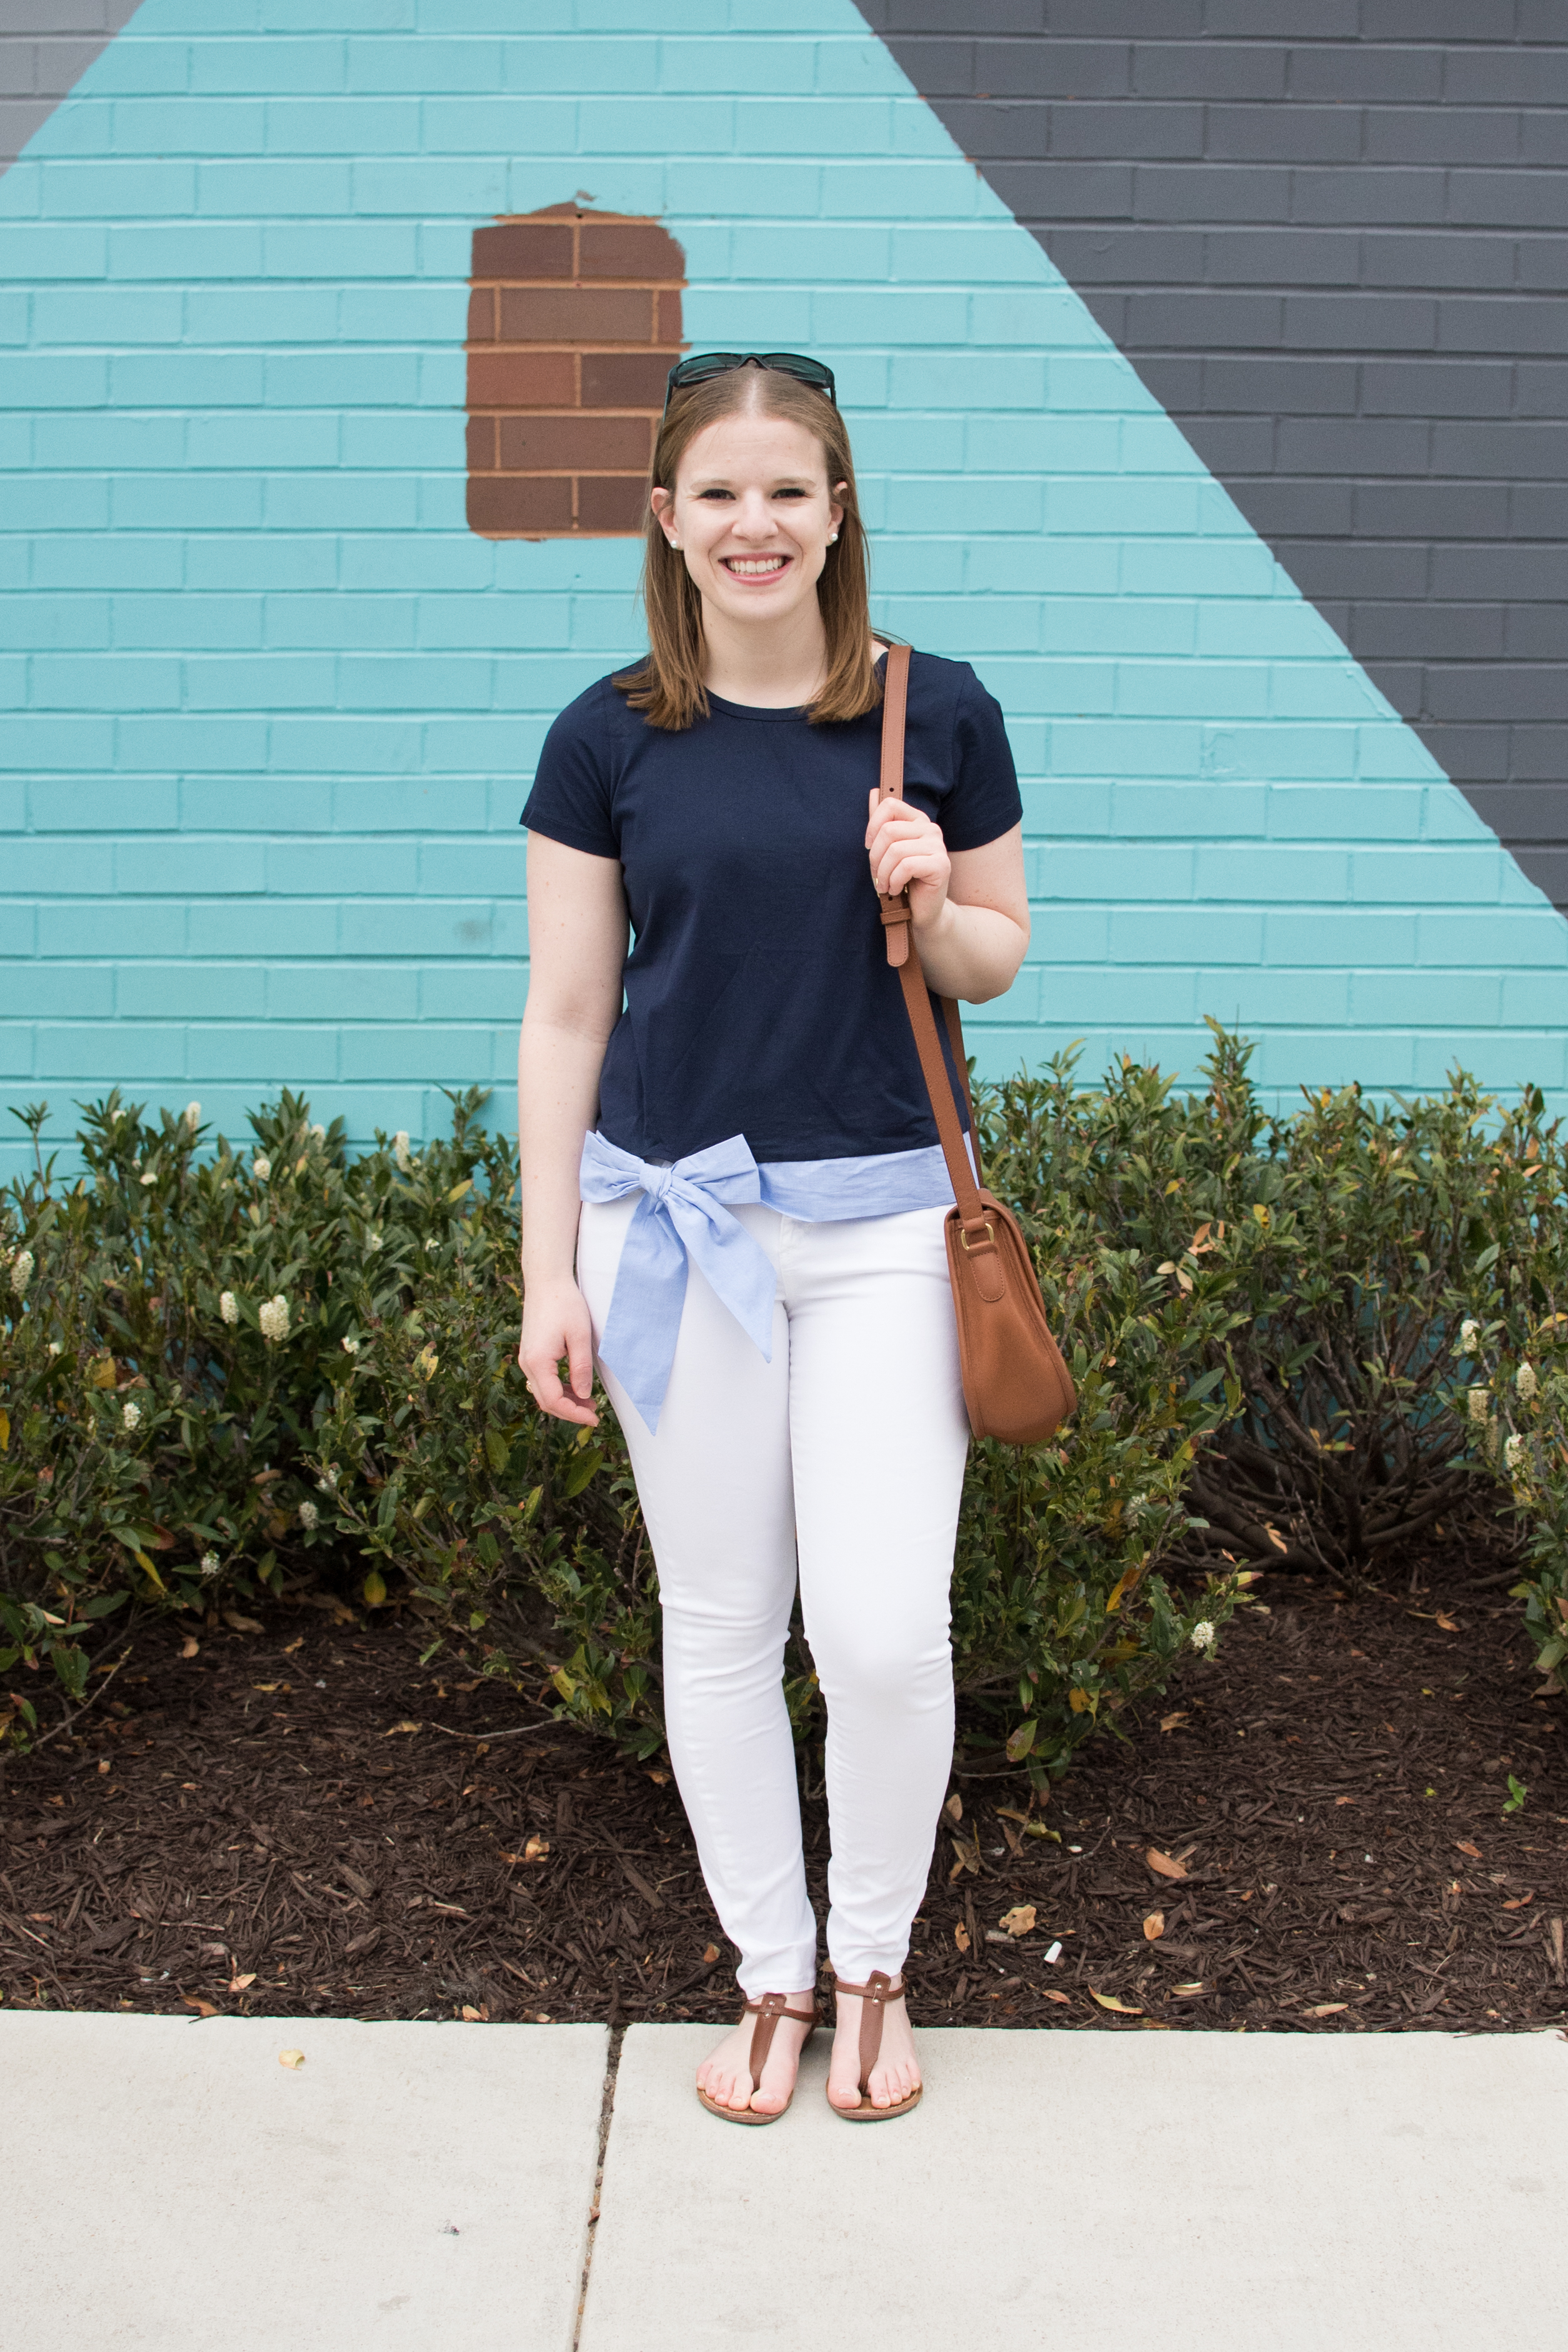 The Side Tie Tee | Something Good, @danaerinw women, fashion, clothing, style, clothes, women's fashion, white denim, white jeans, j.crew side tie tee, t strap sandals, navy top, crossbody bag, saddle bag, coach, joe's jeans, spring style, how to style white jeans